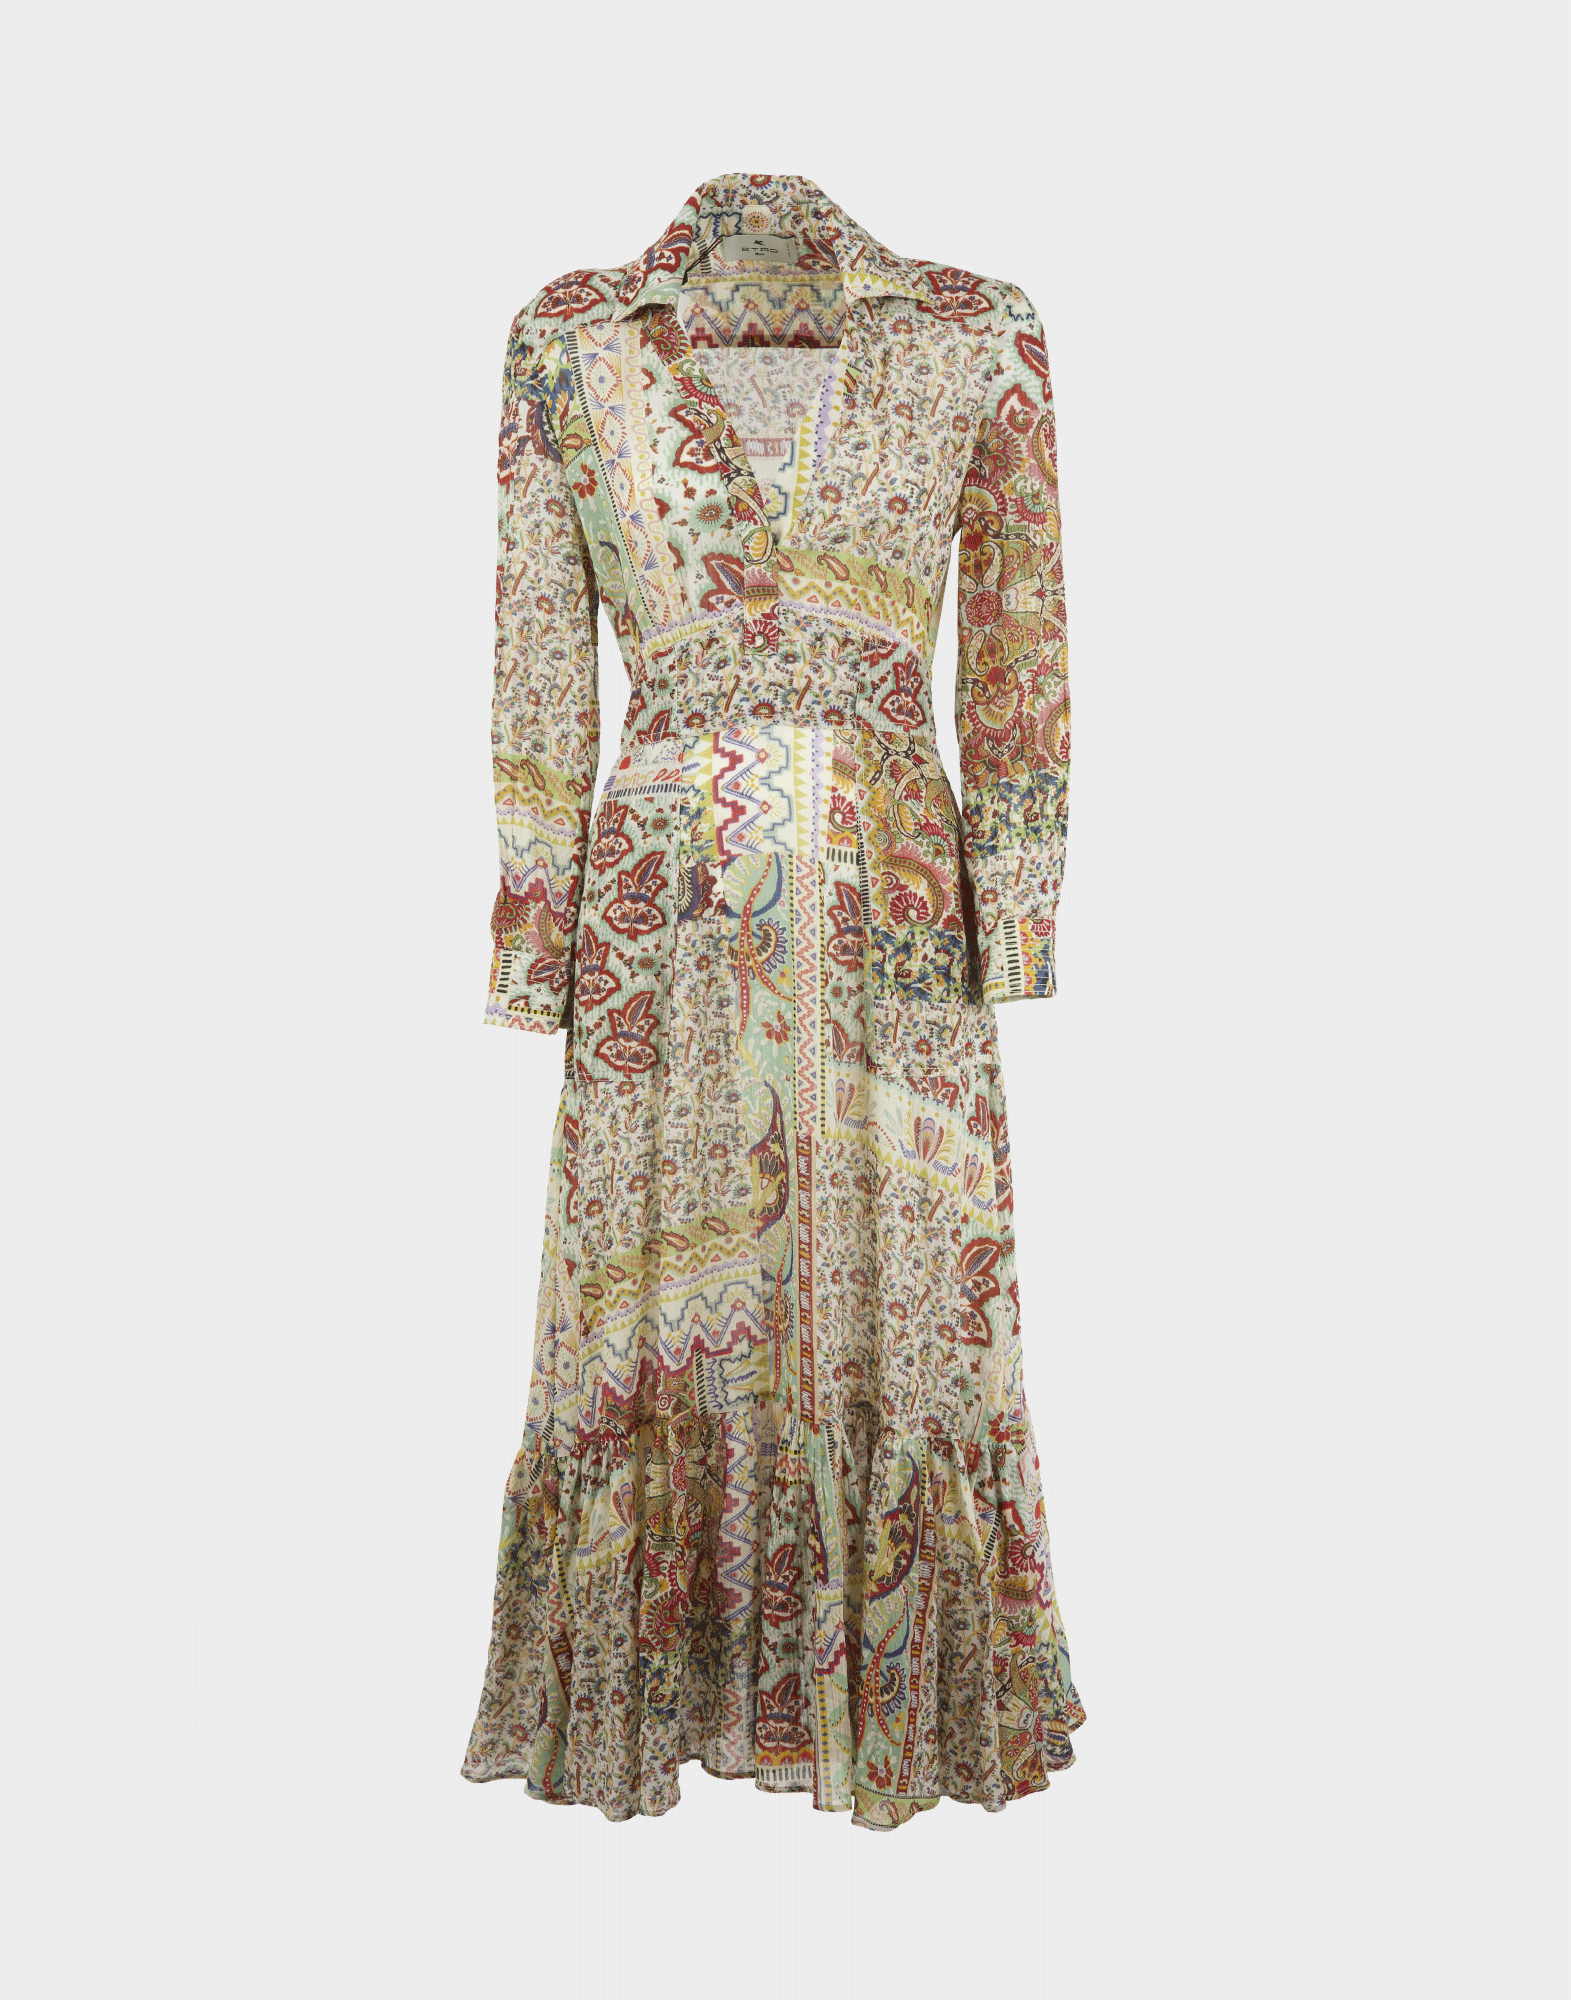 women's long dress with V-neck and paisley pattern, long sleeves and ruffles on the bottom